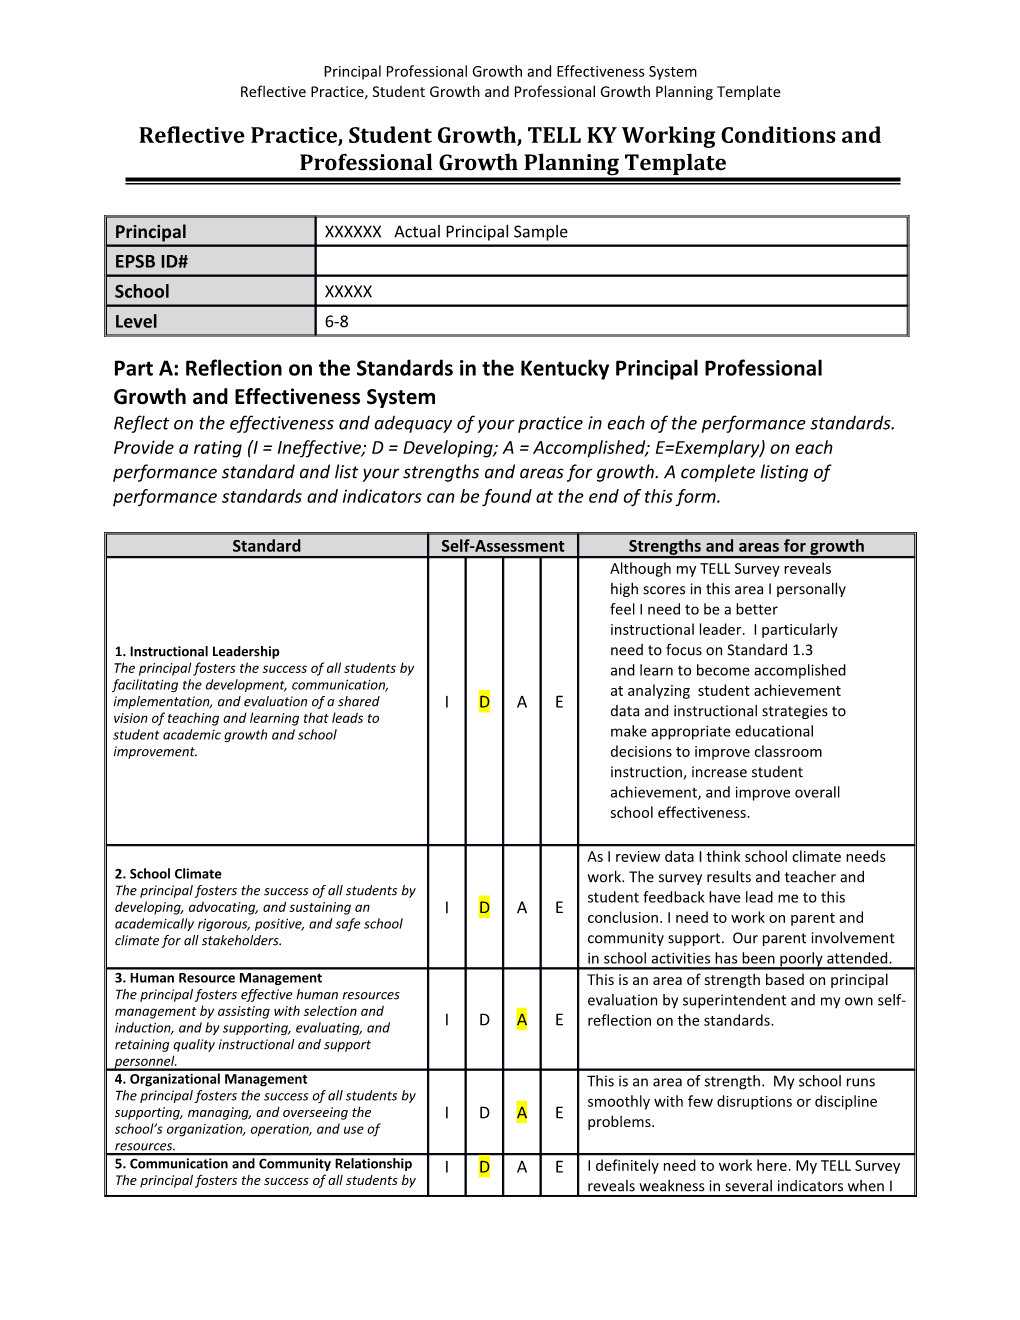 Principal Reflective Practice Student Growth And Professional Growth Planning Template